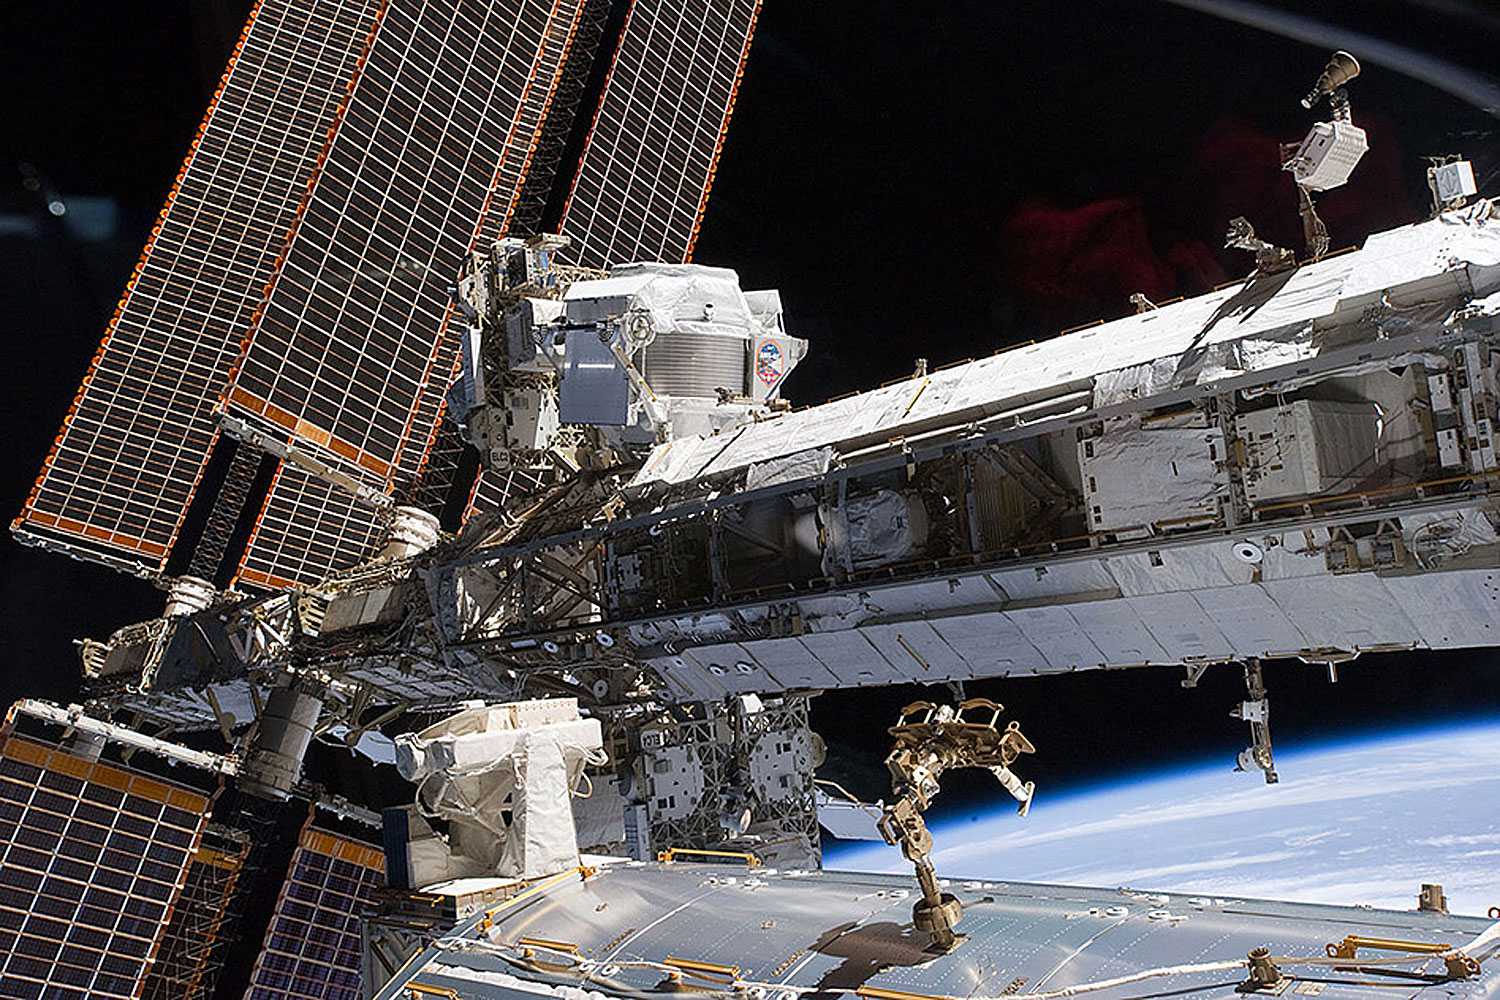 The AMS particle detector on the ISS